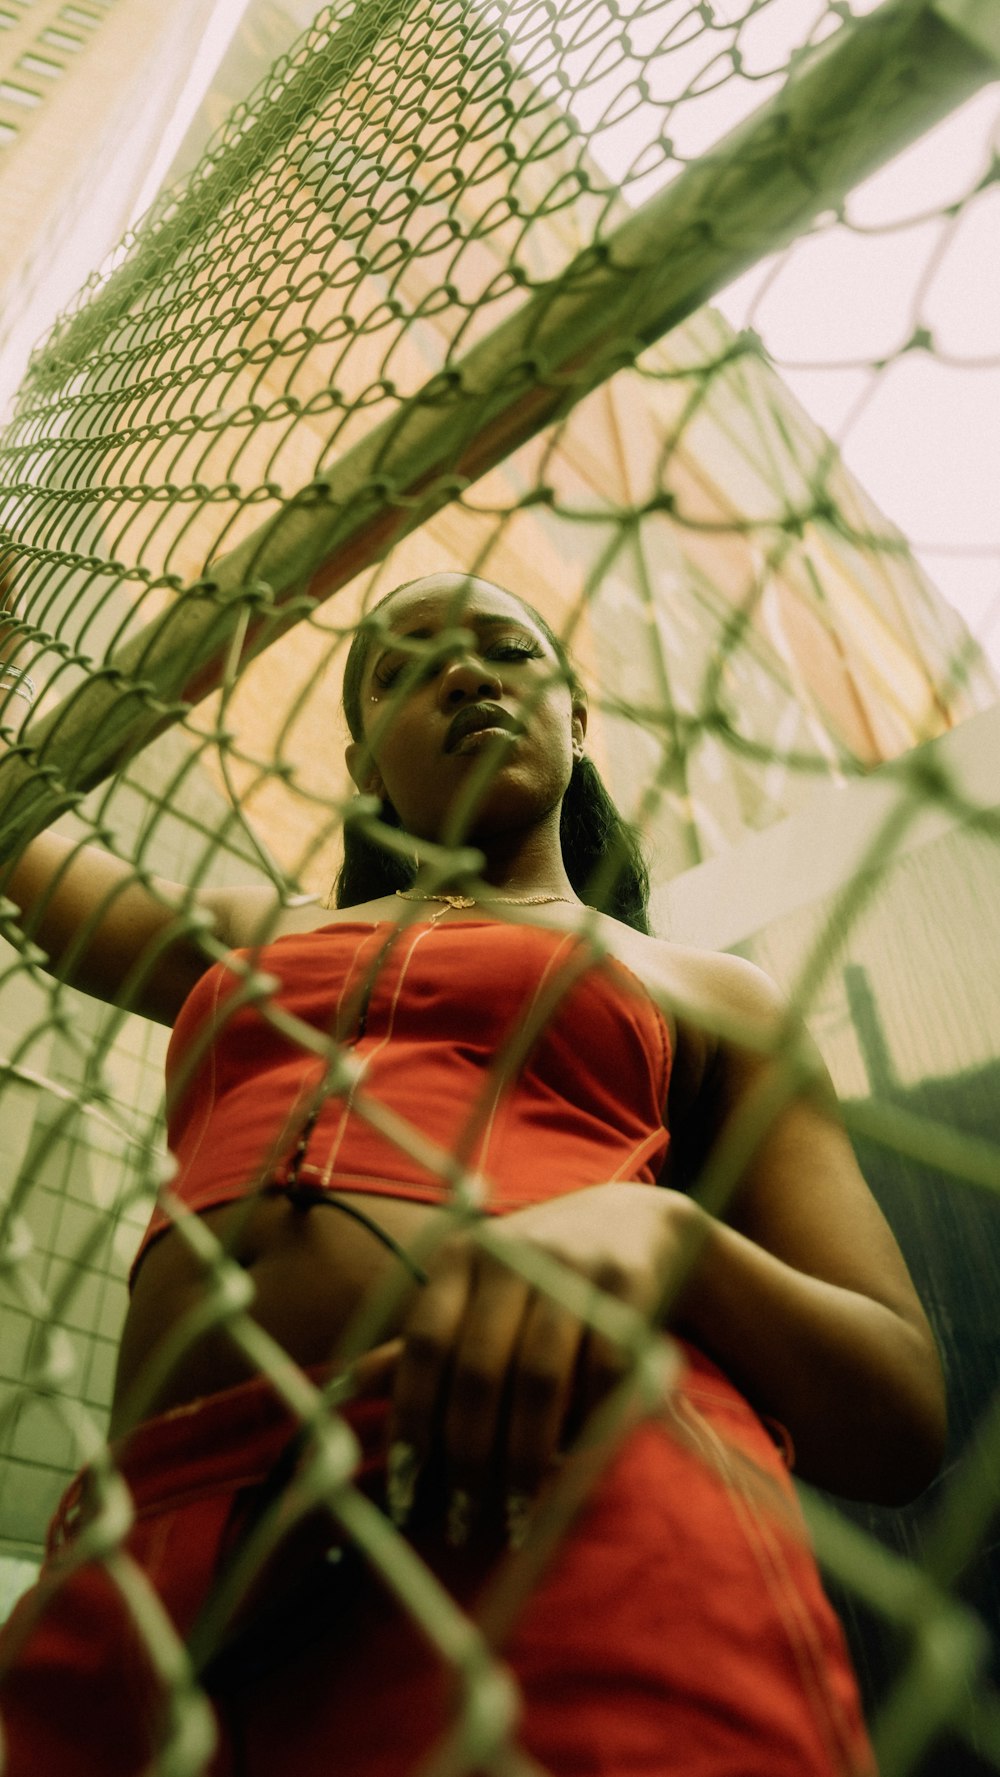 a woman in a red shirt leaning against a net